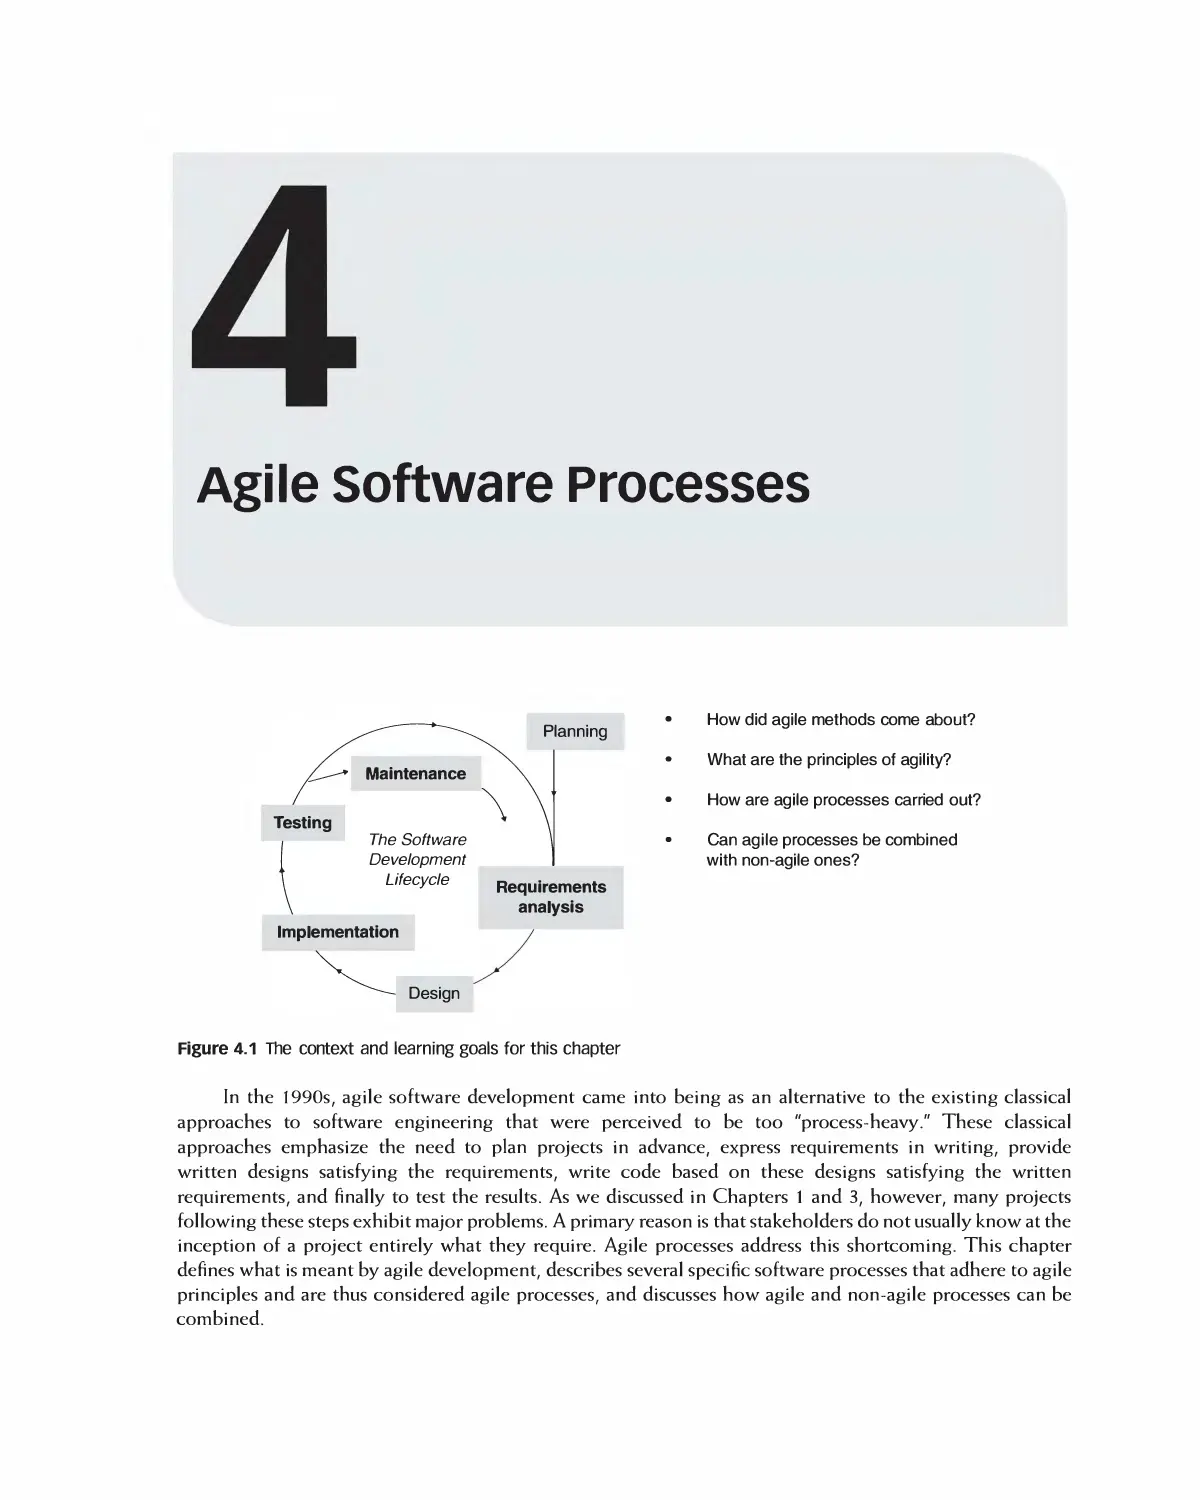 Chapter 4: Agile Software Processes